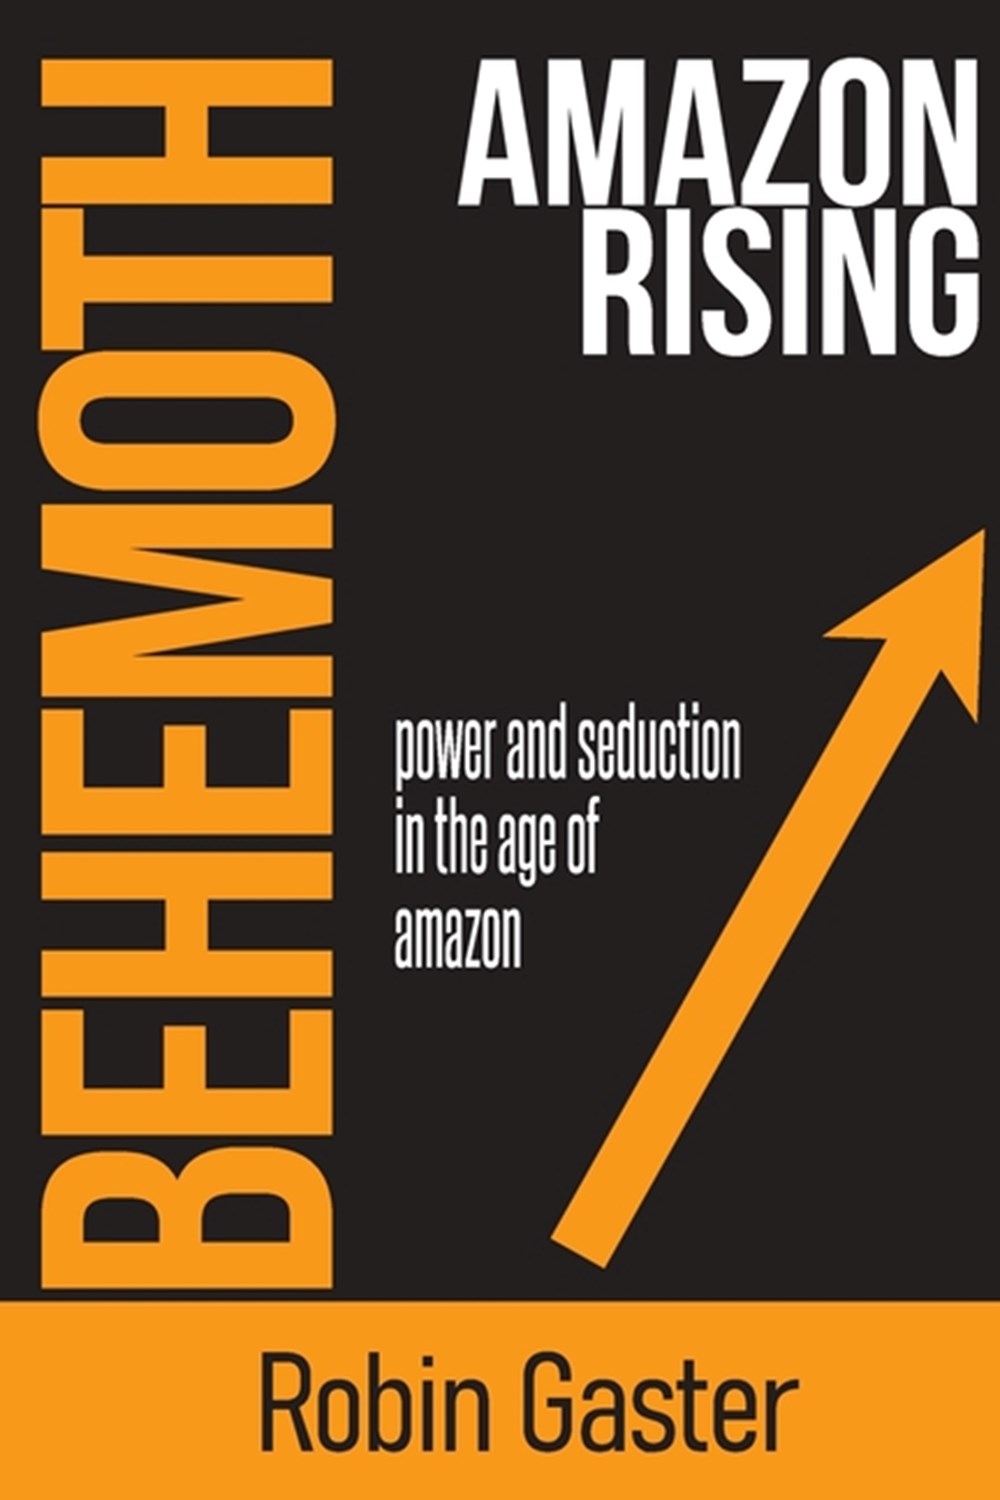 Behemoth, Amazon Rising Power and Seduction in the Age of Amazon